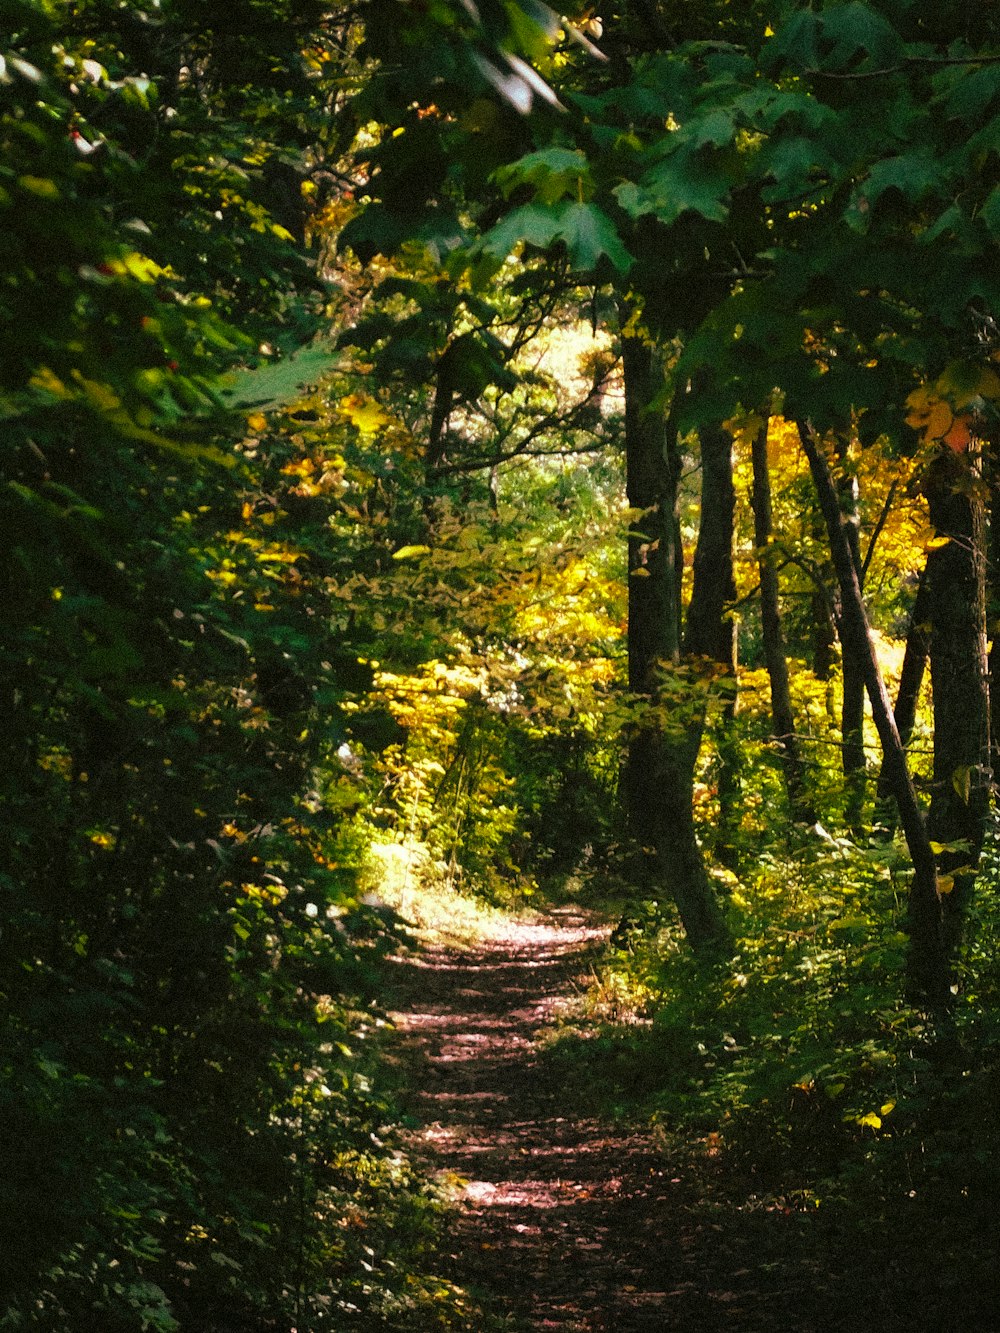 a path through a forest with lots of trees